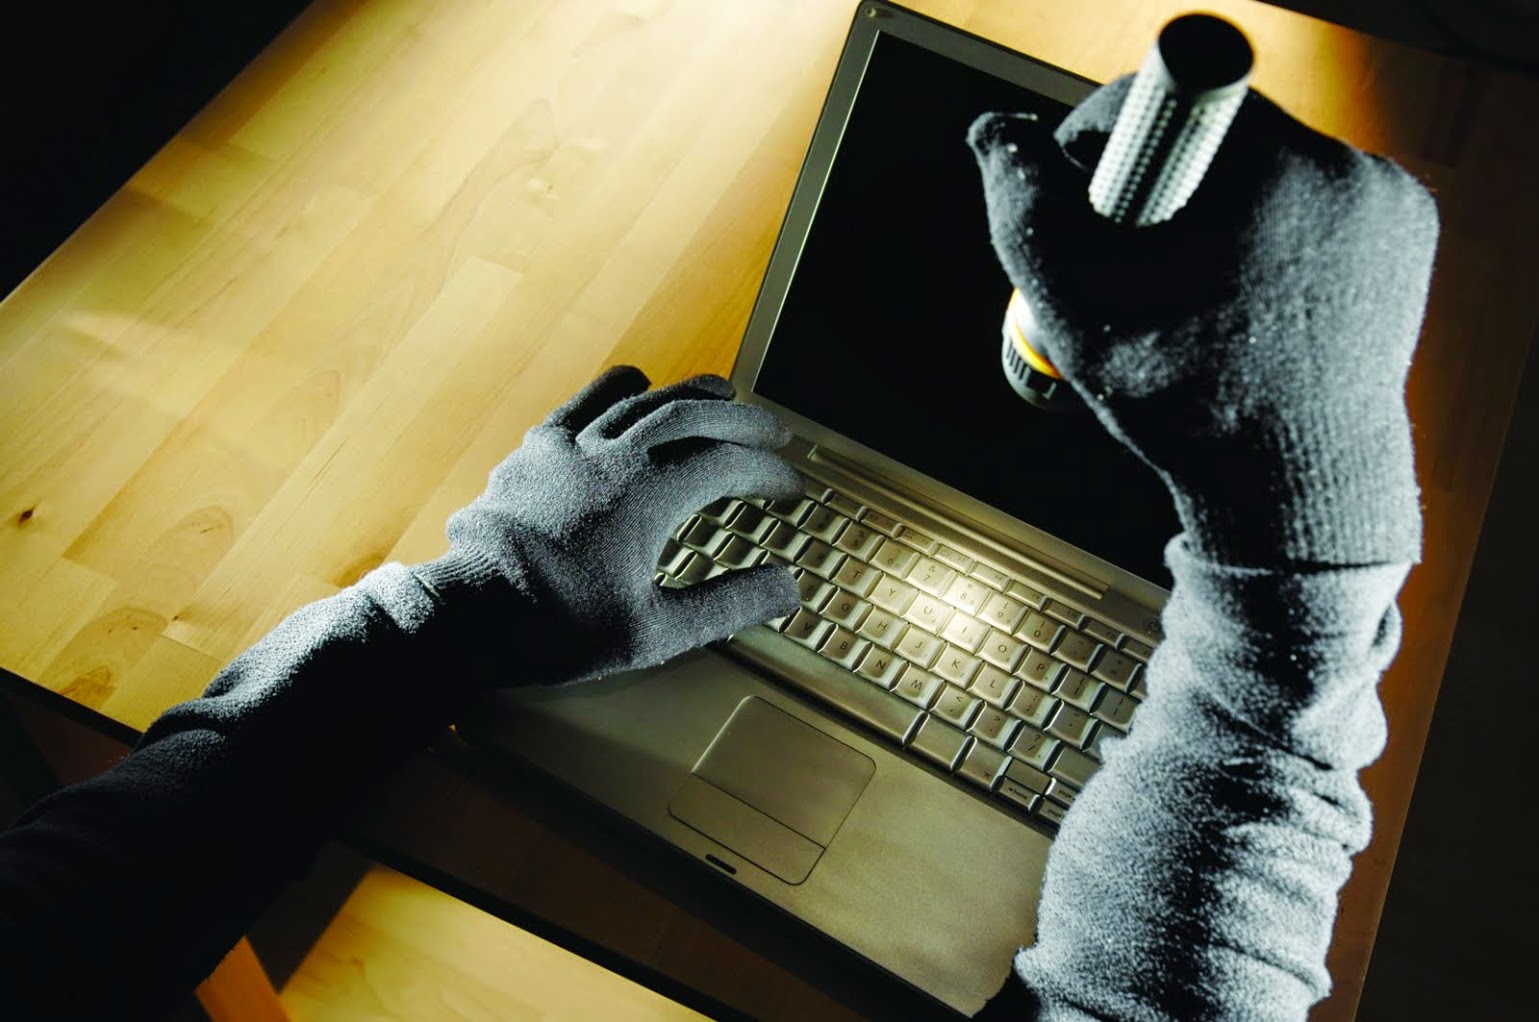 person wearing all black sweatshirt and gloves while holding a flashlight over a laptop